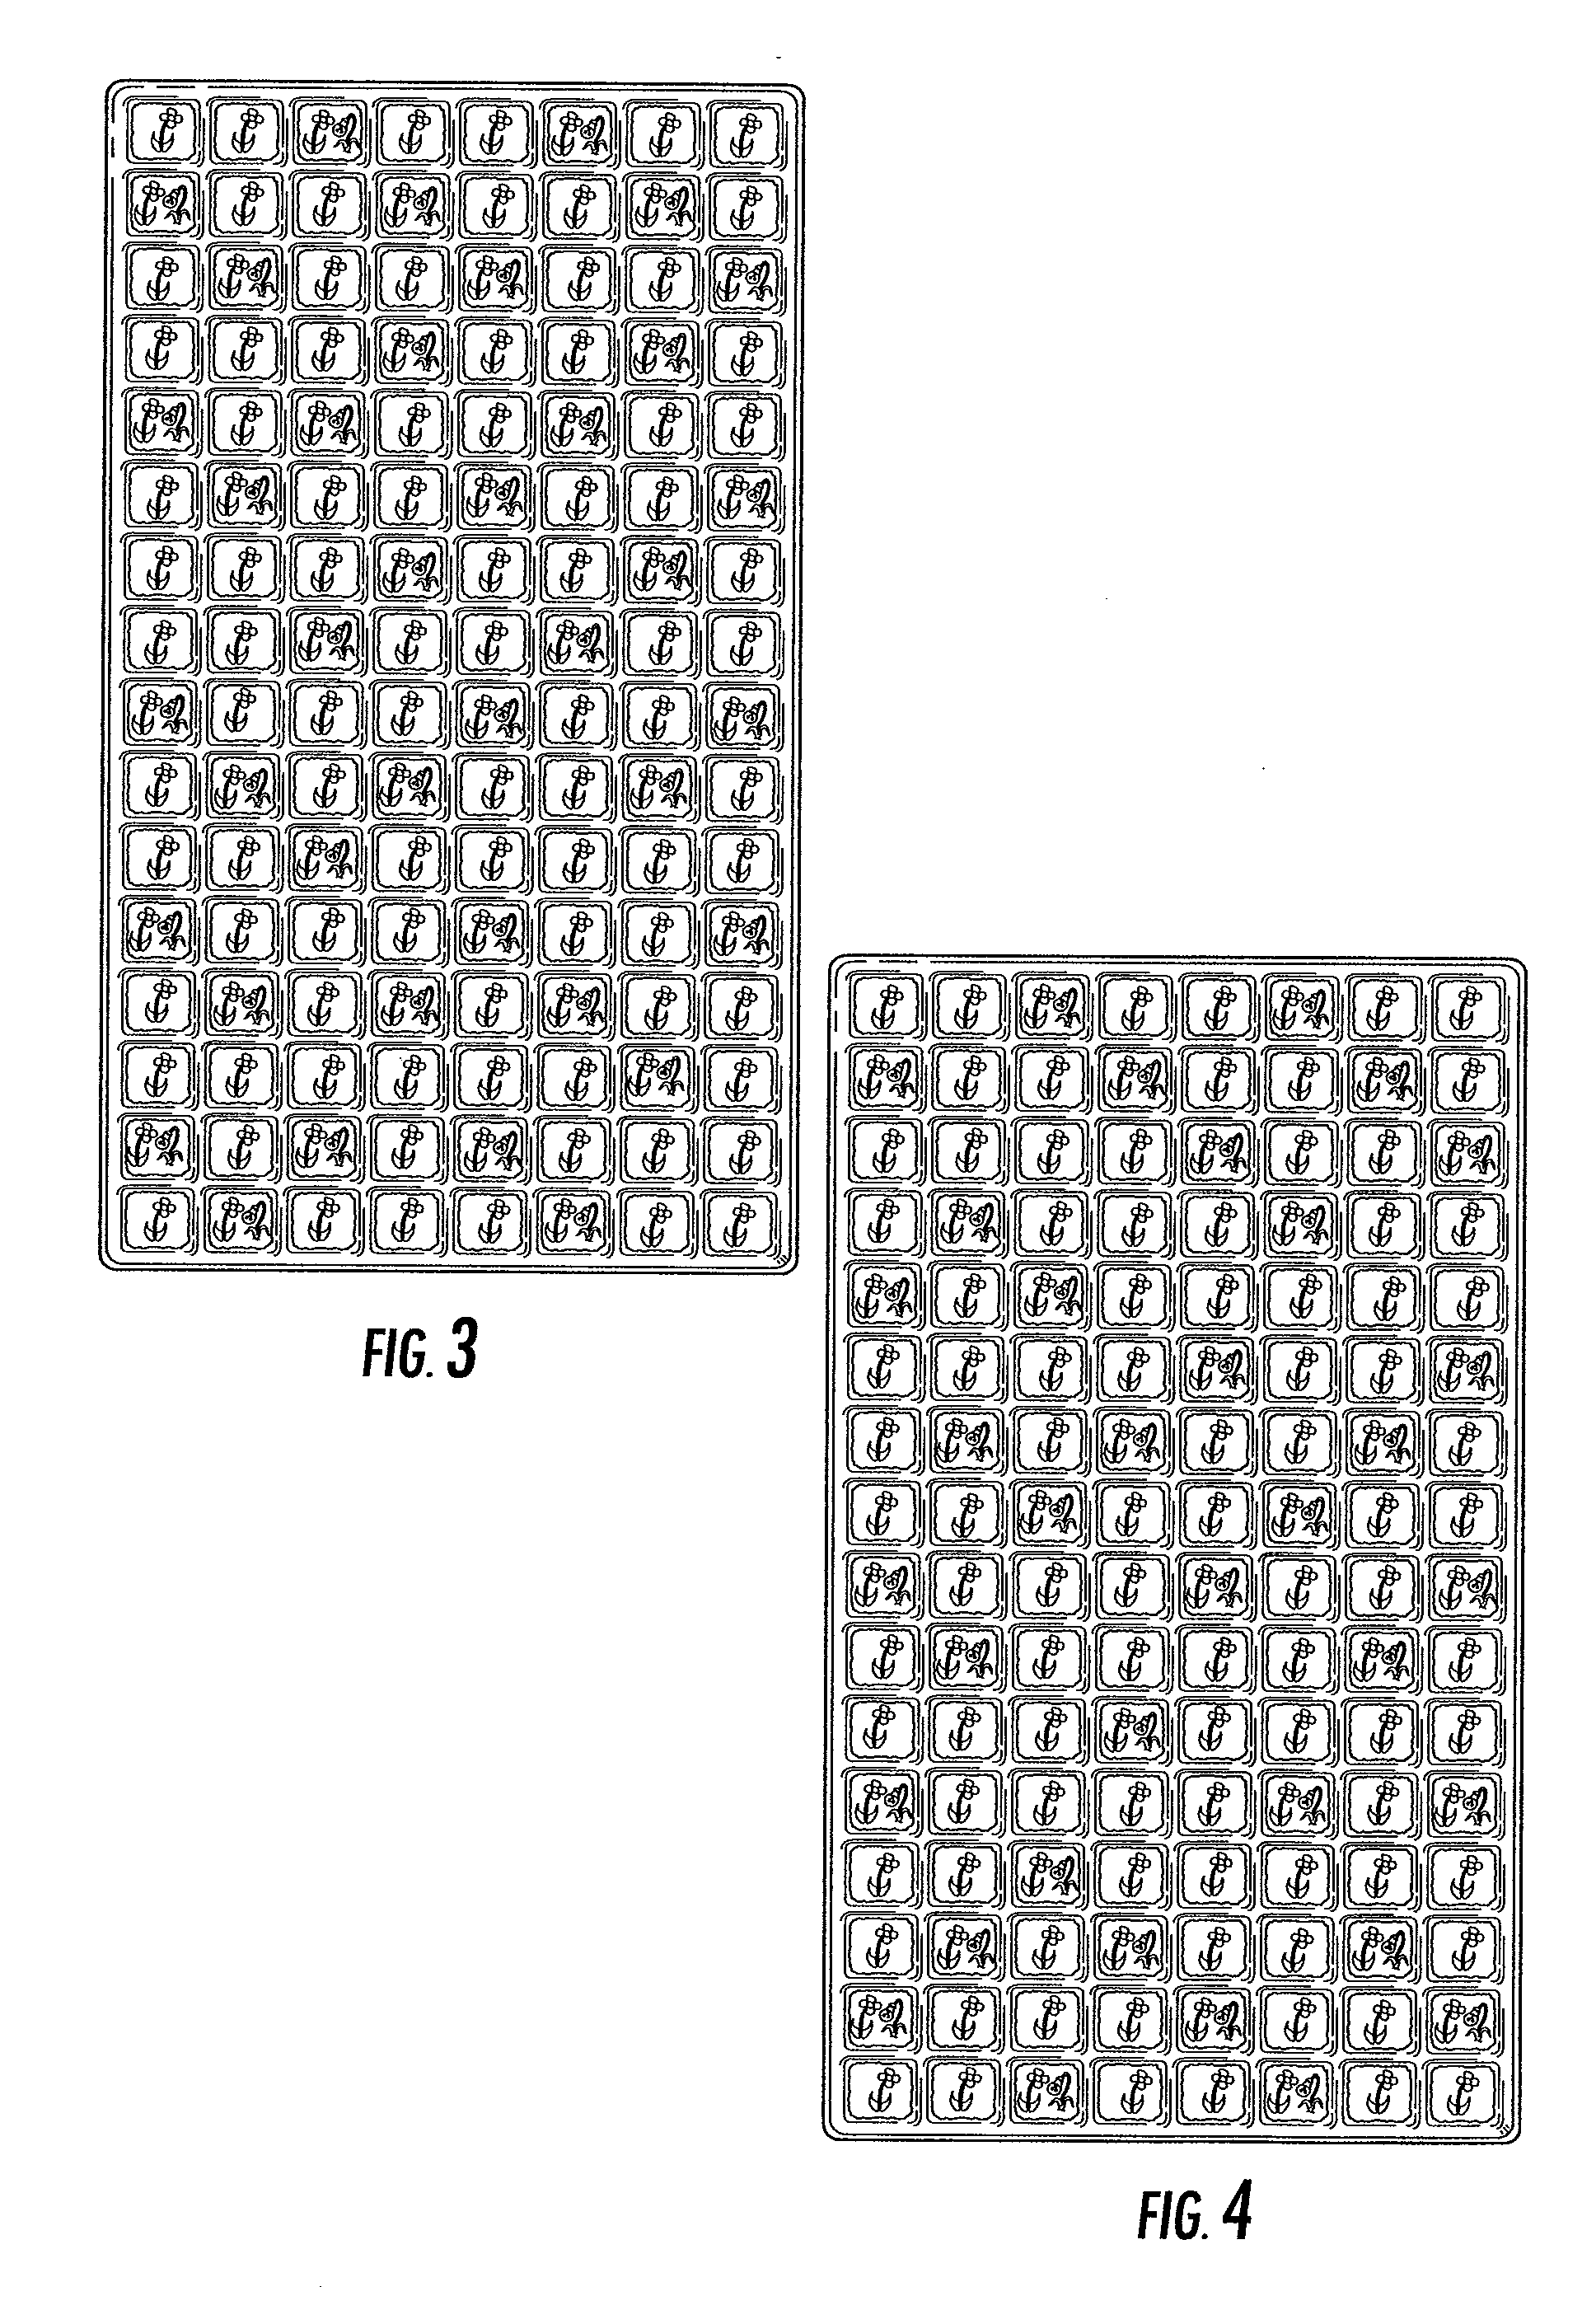 Method of planting triploid seedless watermelon seeds and enhanced watermelon pollenizer seeds for producing watermelon transplants